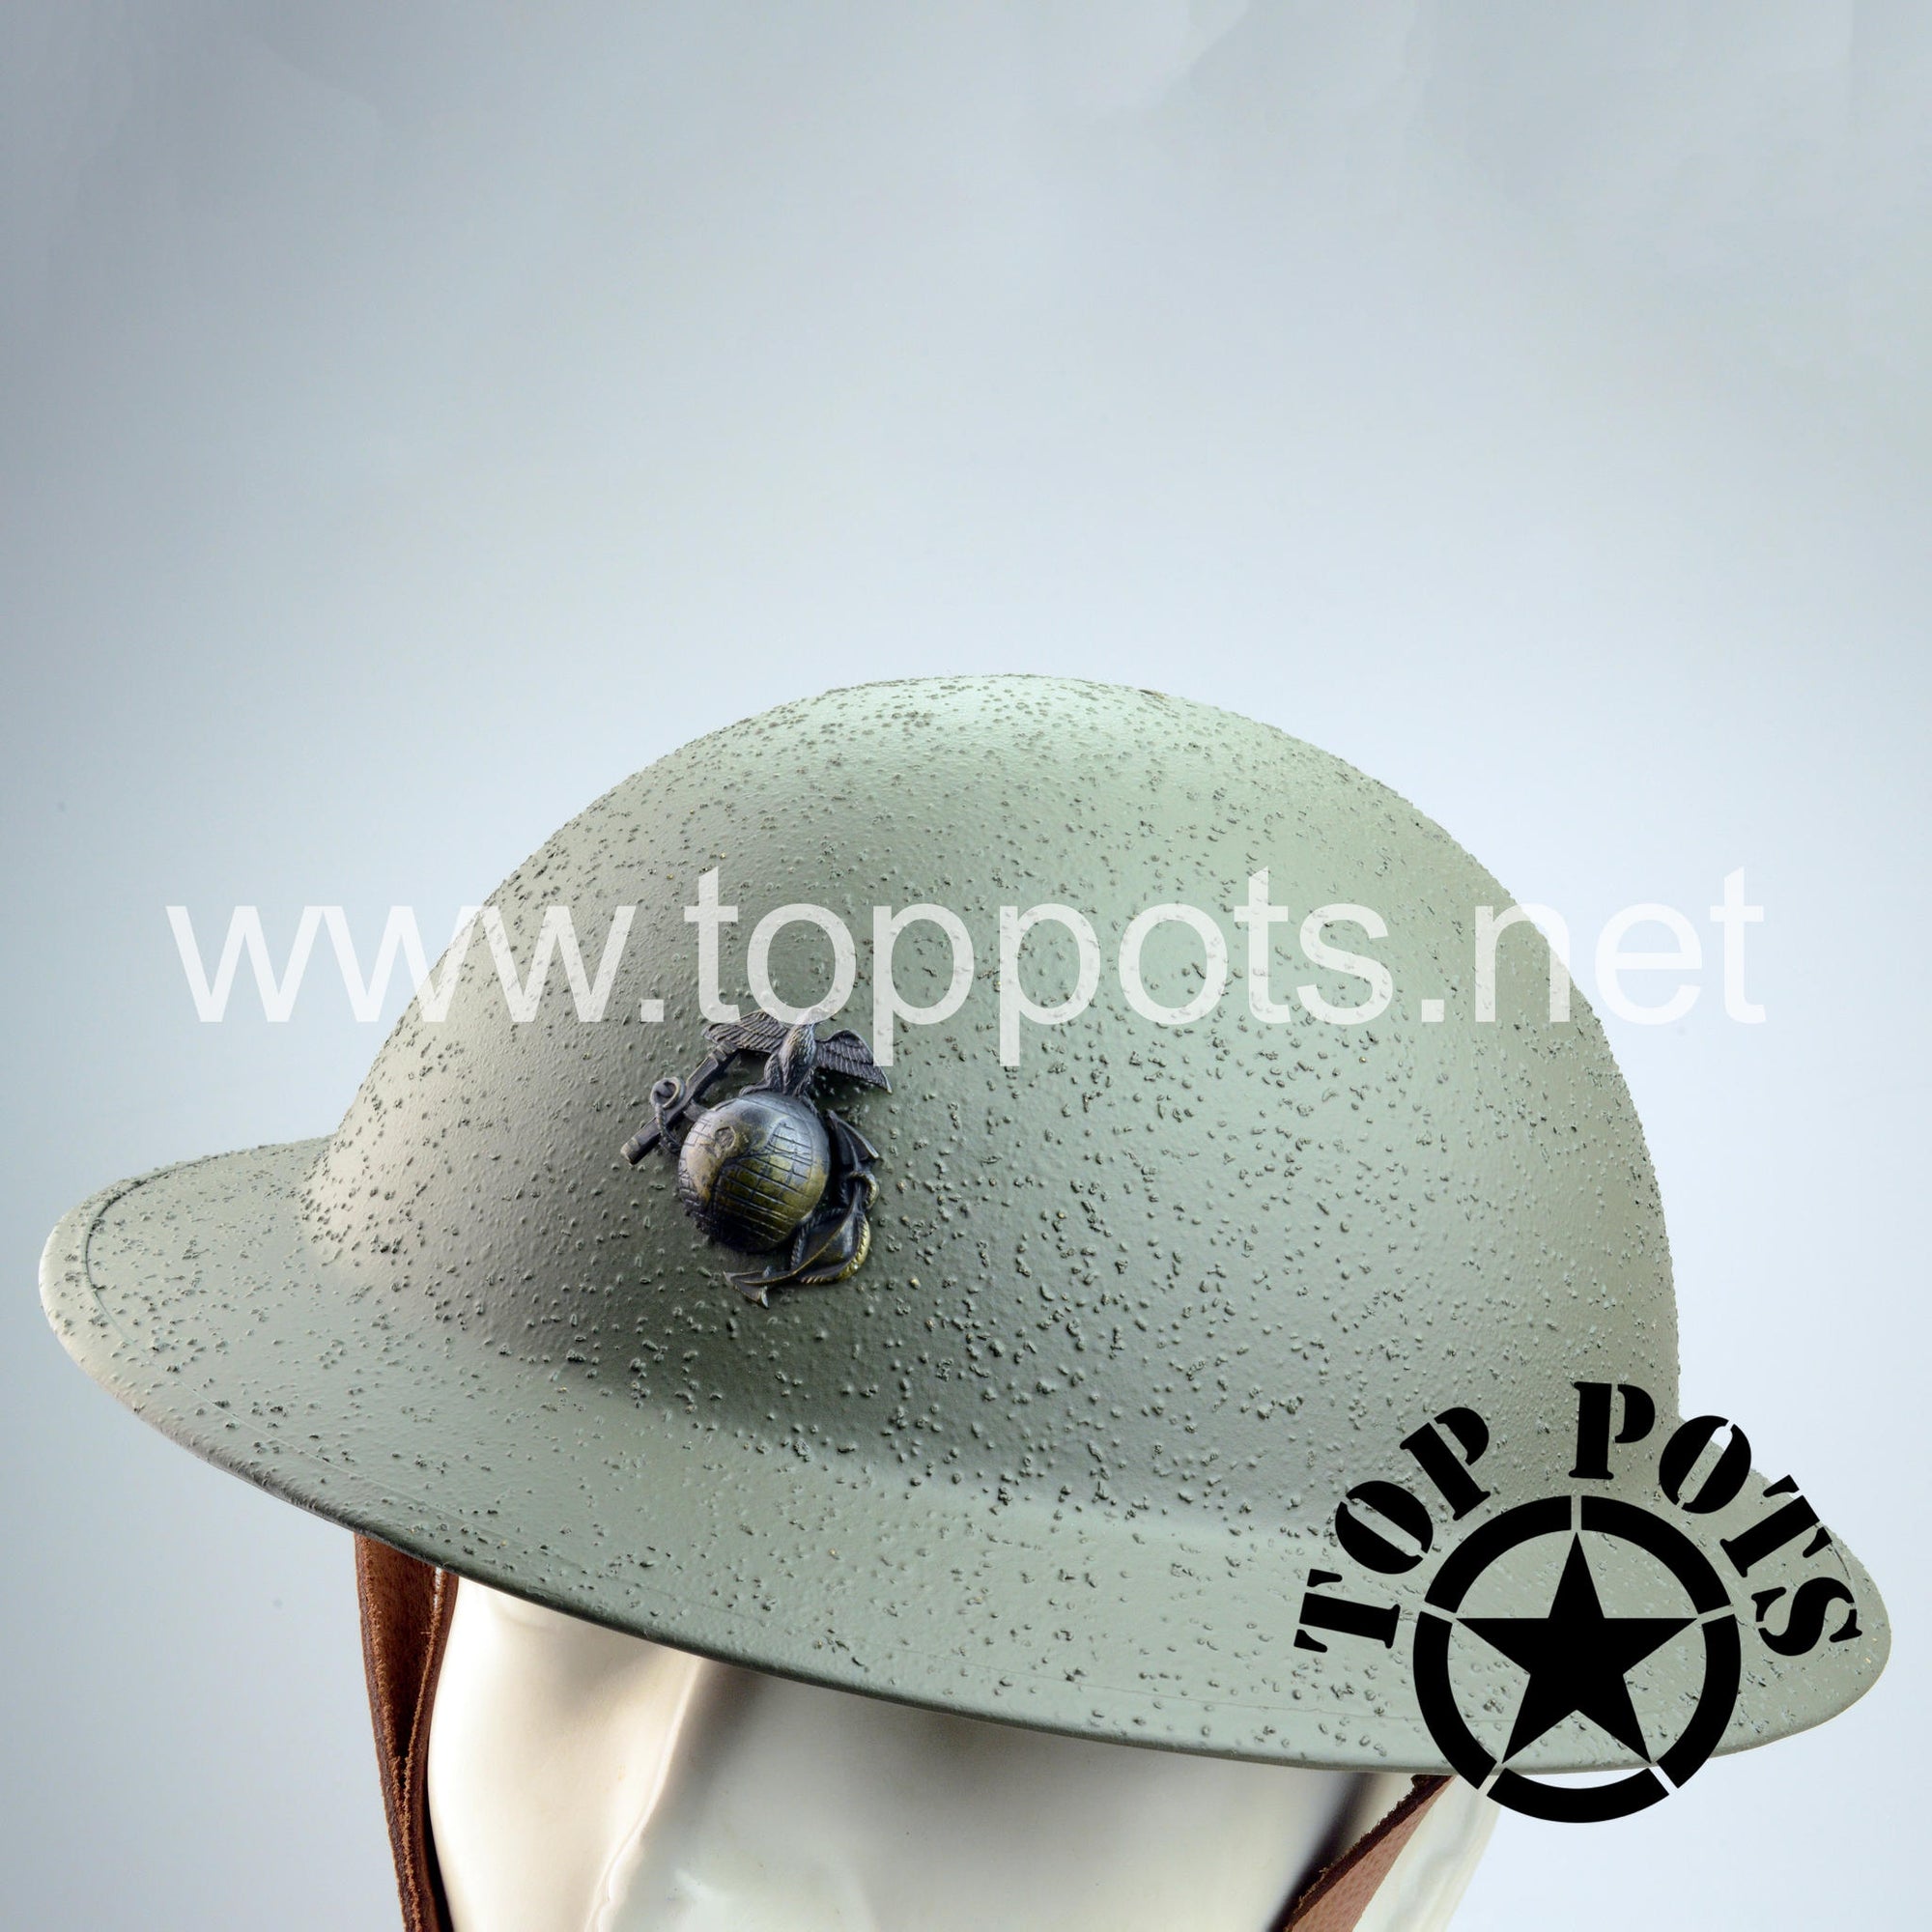 WWI USMC Reproduction Marine Corps Brodie Helmet and Liner with EGA – Textured Finish